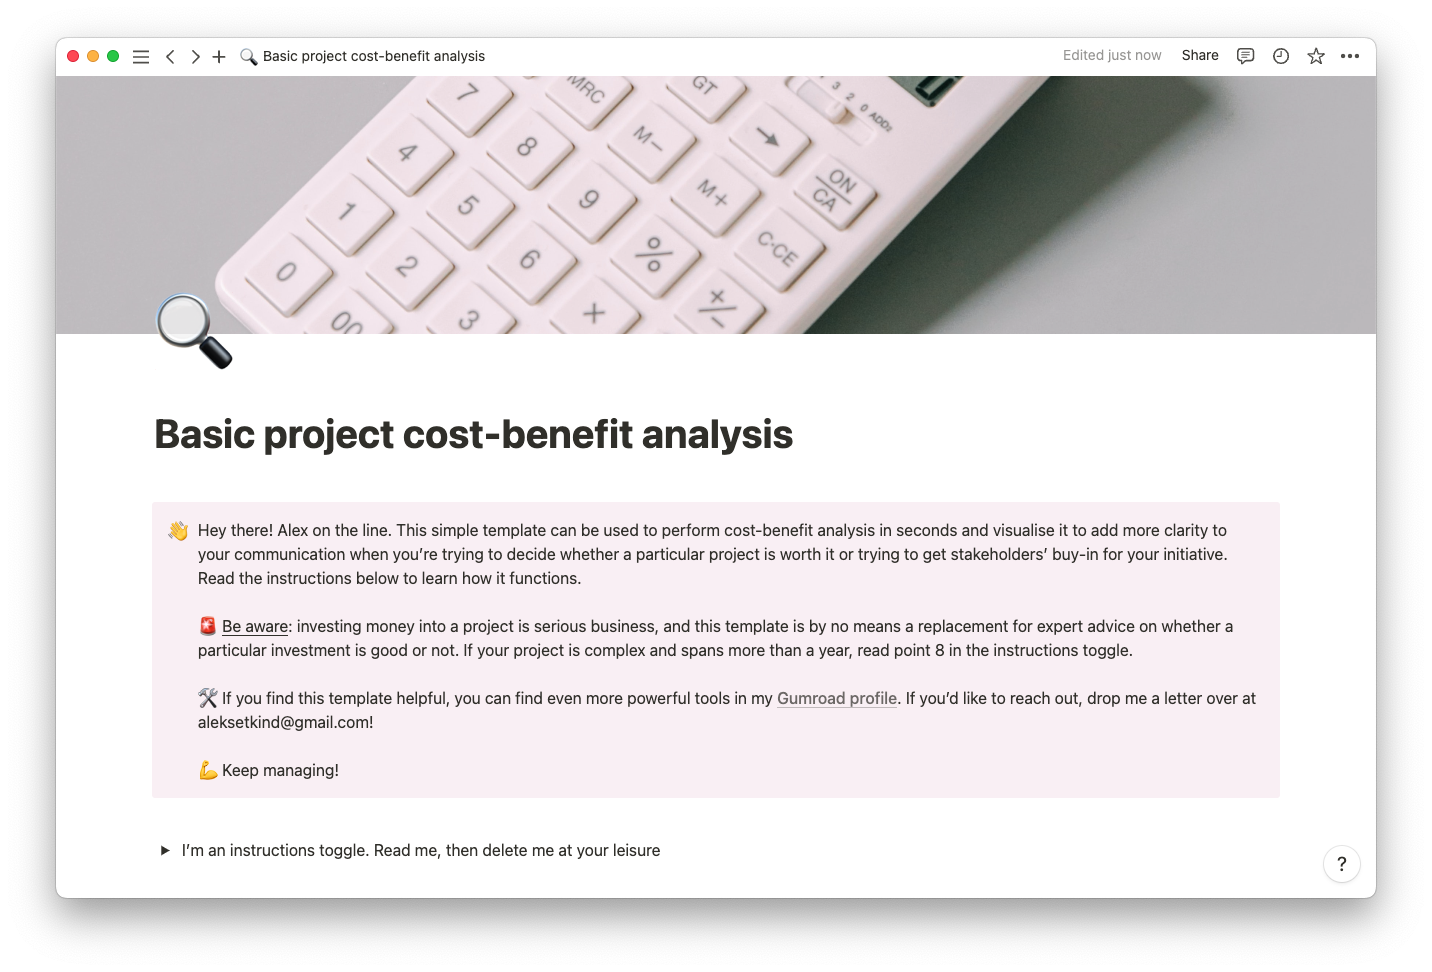 Basic project cost-benefit analysis template thumbnail